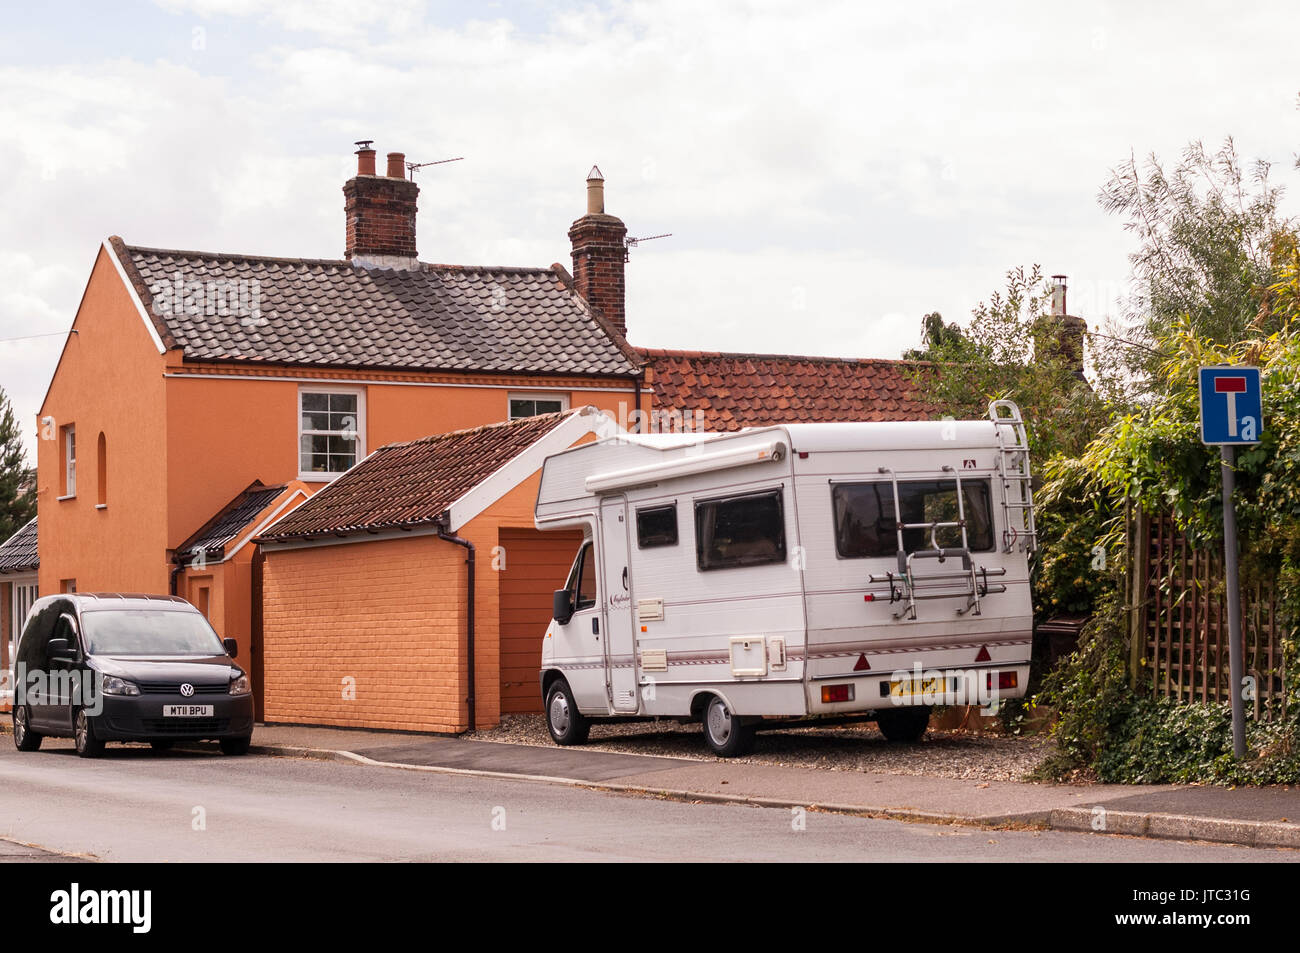 A caravanette campervan parked outside a house in the Uk Stock Photo